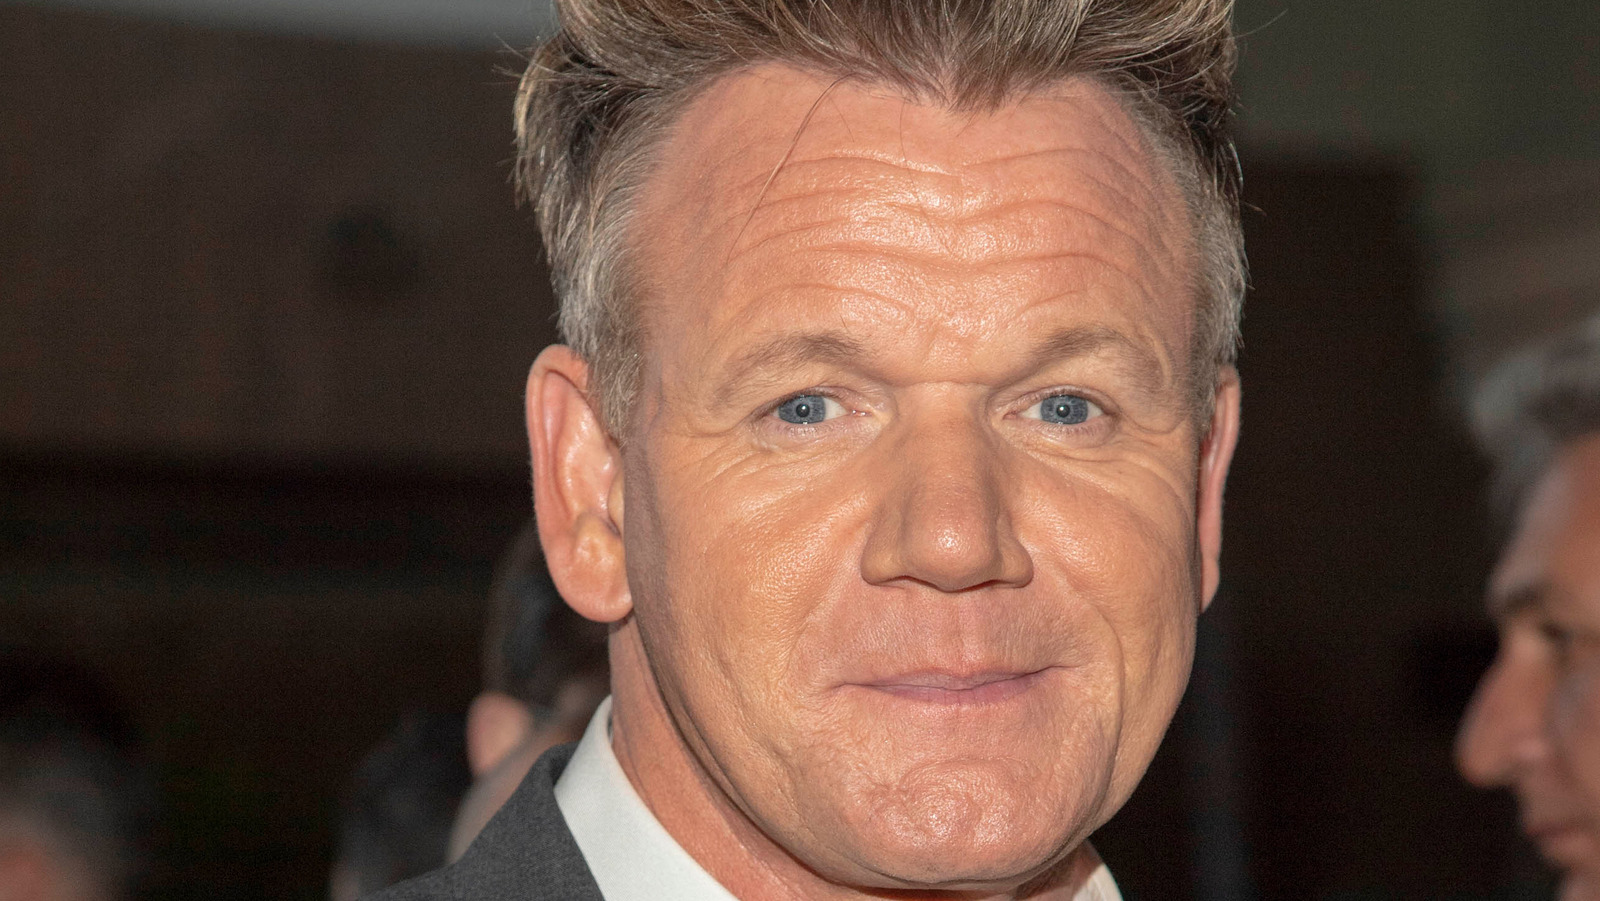 Gordon Ramsay Just Expanded His Restaurant Empire Into New York's Epicenter